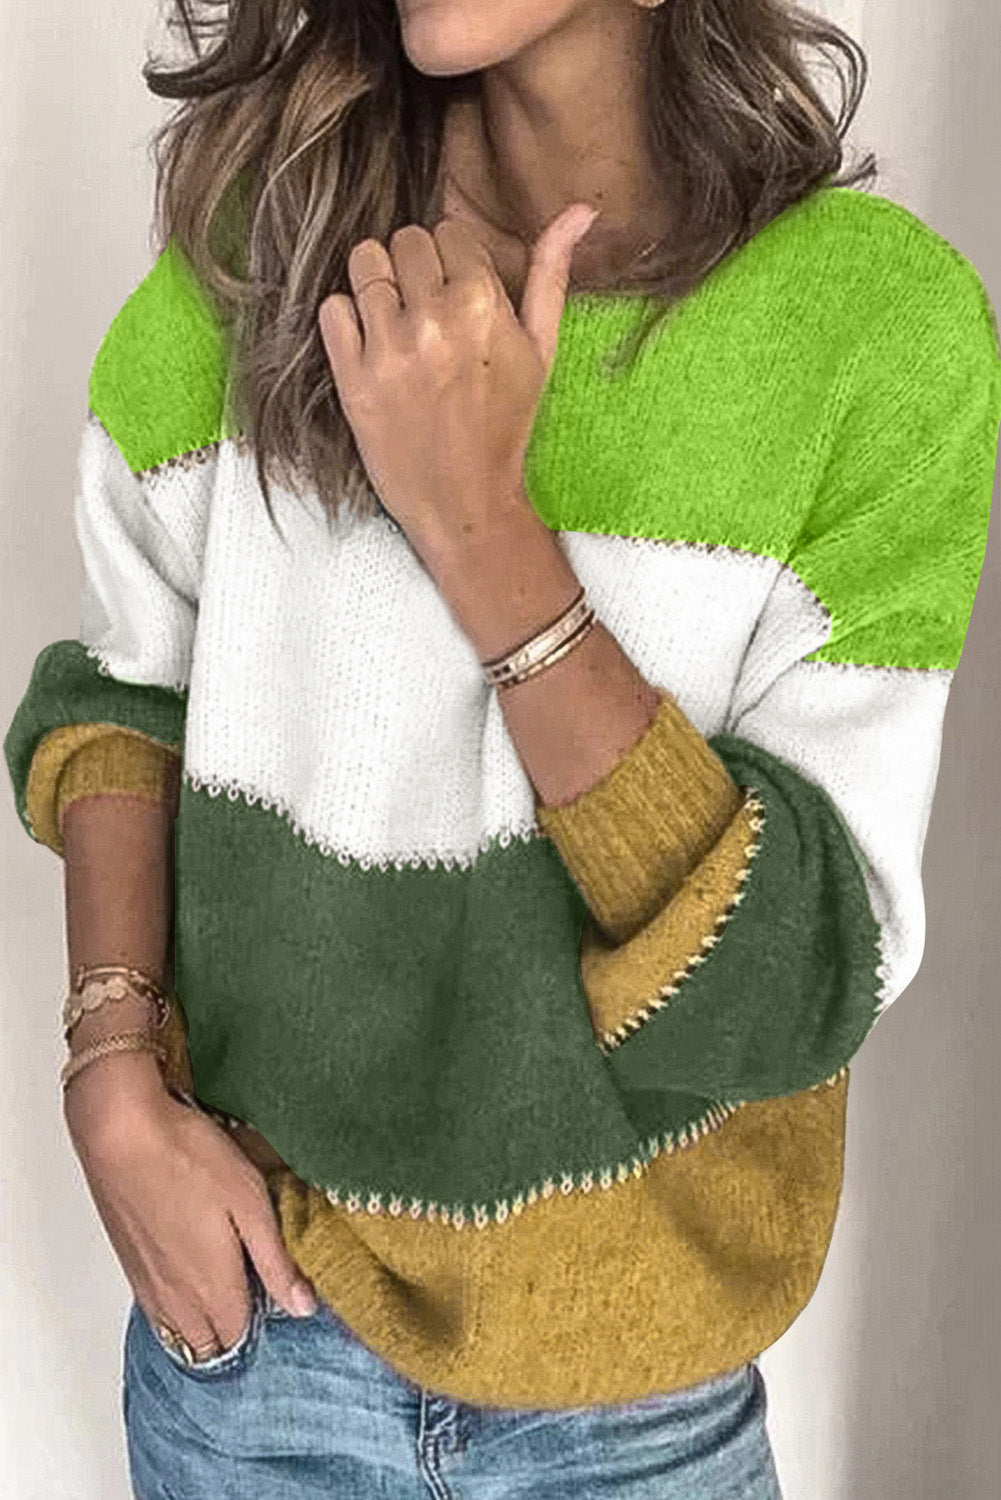 Green Pullover Colorblock Winter Sweater Sweaters & Cardigans JT's Designer Fashion